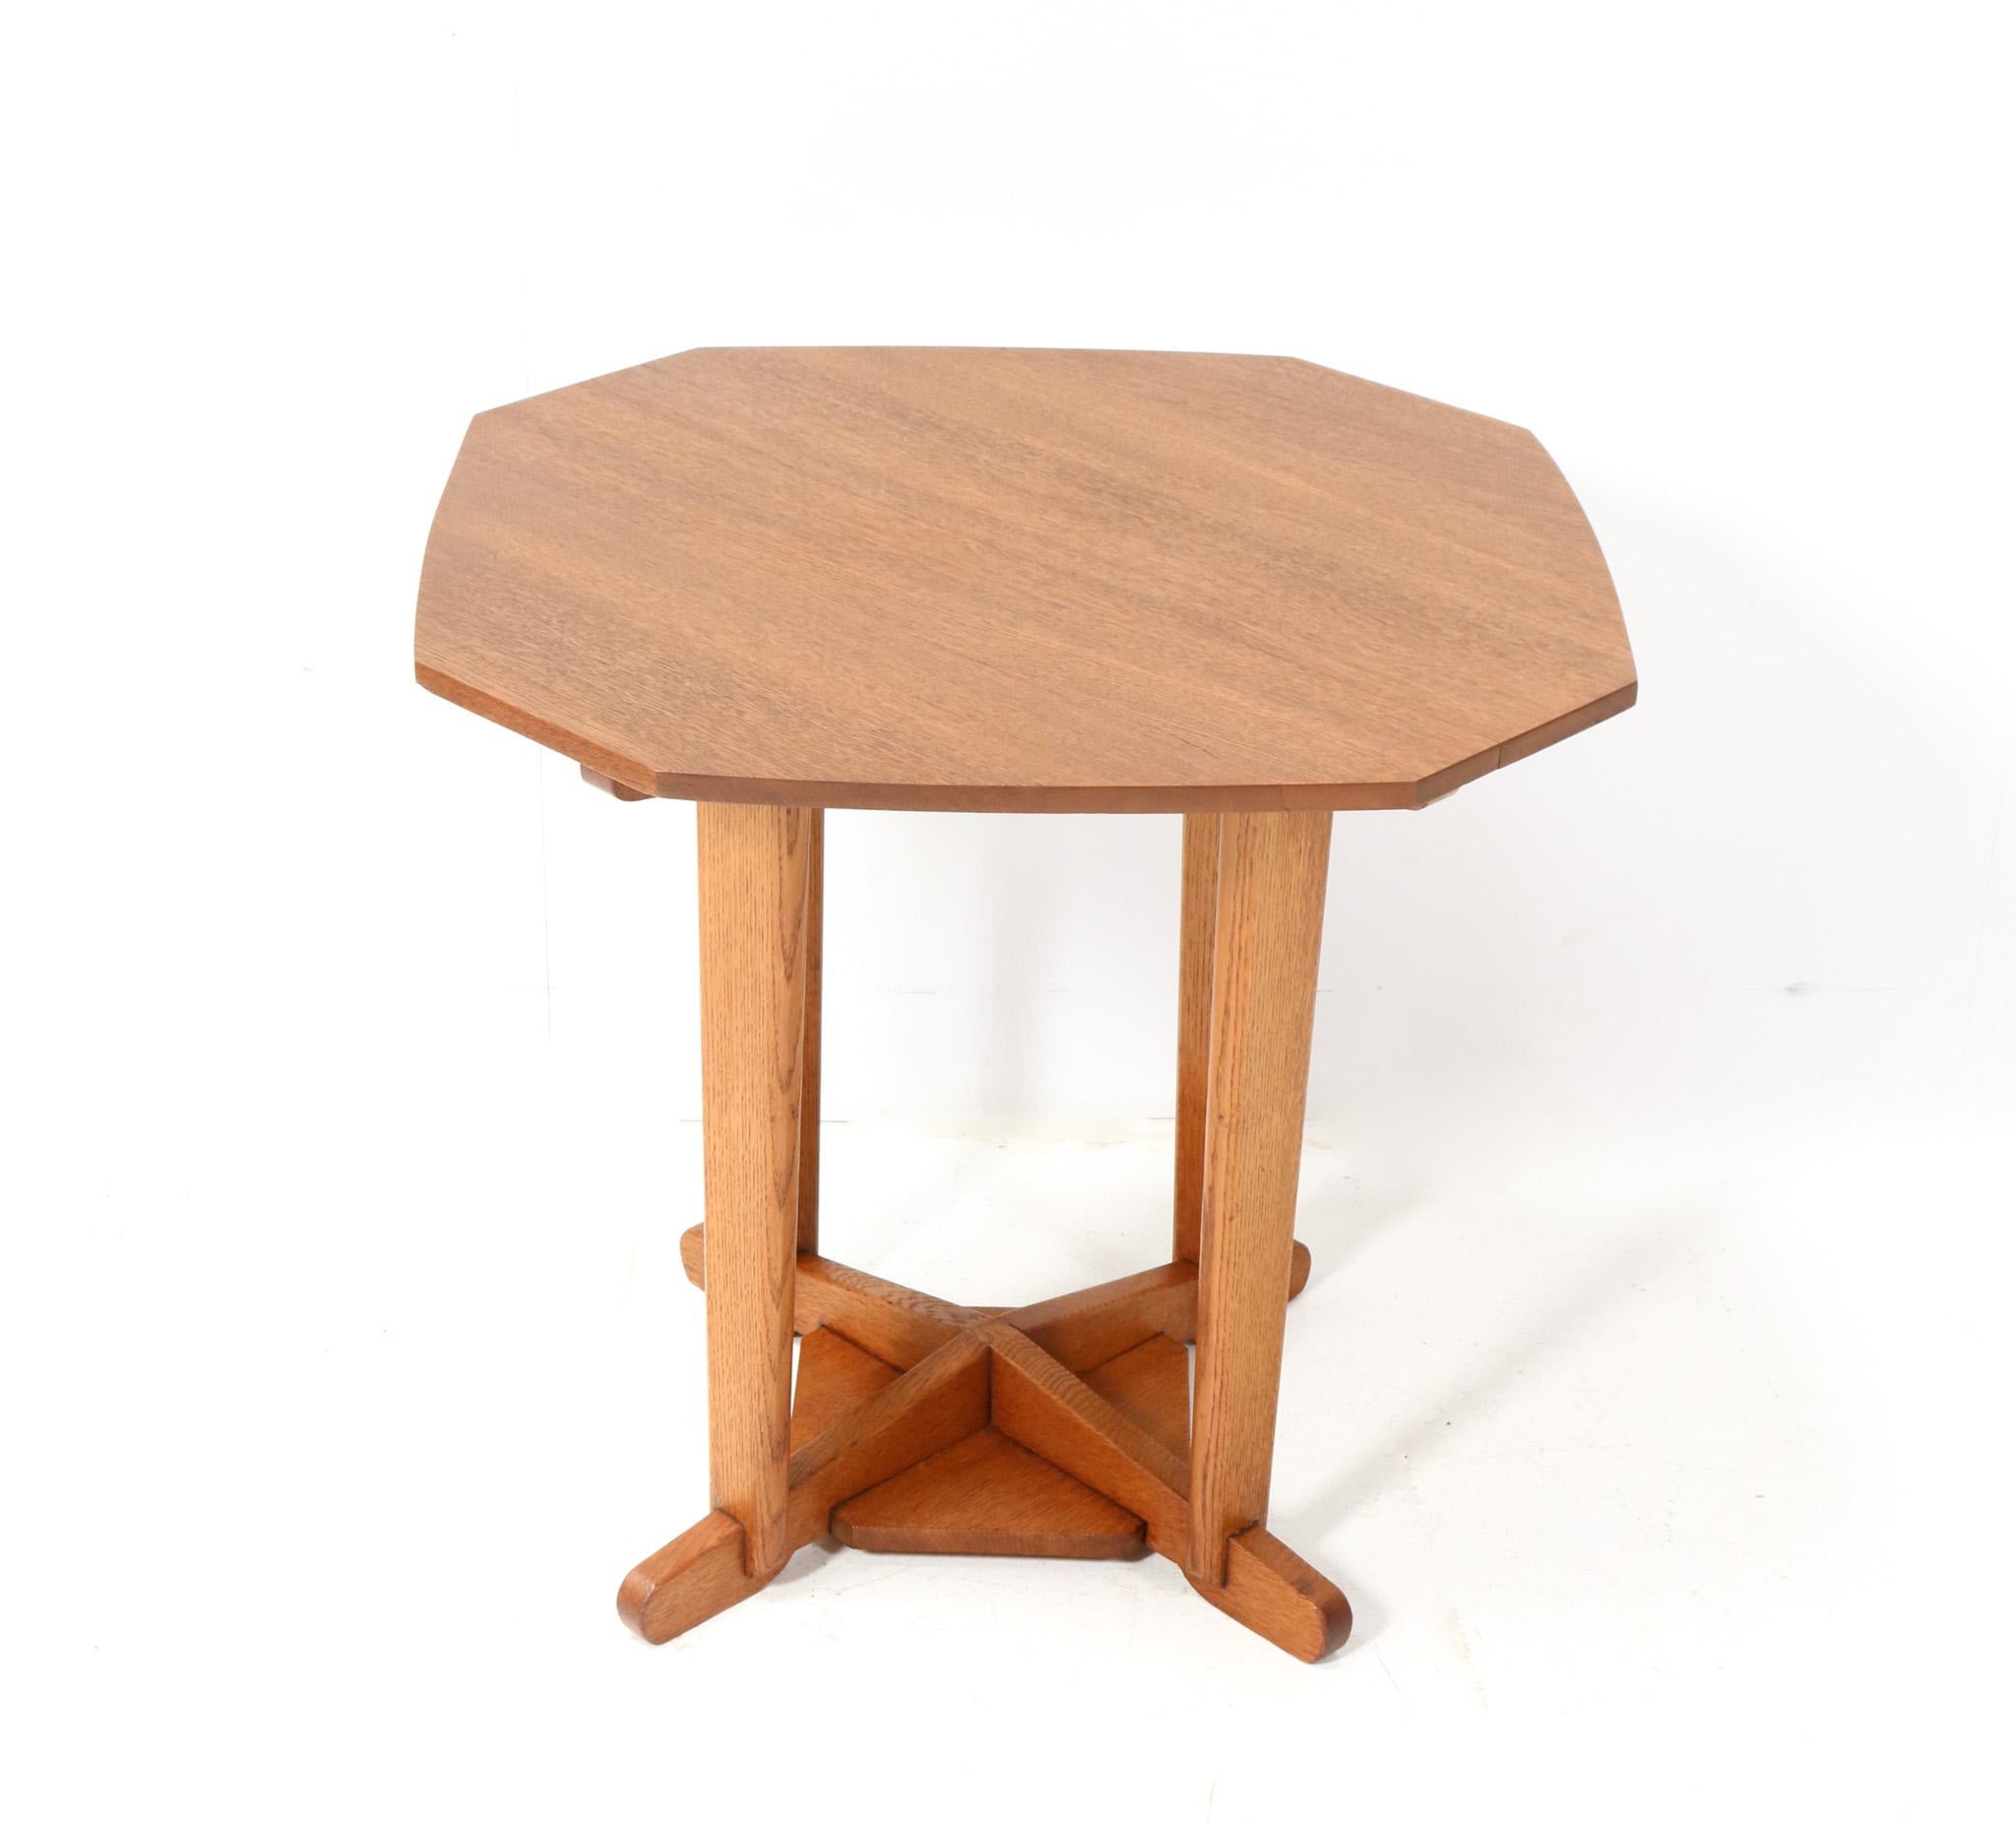 Stunning and rare Art Deco Amsterdamse School center table.
Striking Dutch design from the 1920s.
Solid oak well designed base with original solid oak top.
This wonderful Art Deco Amsterdamse School center table is in very good original condition